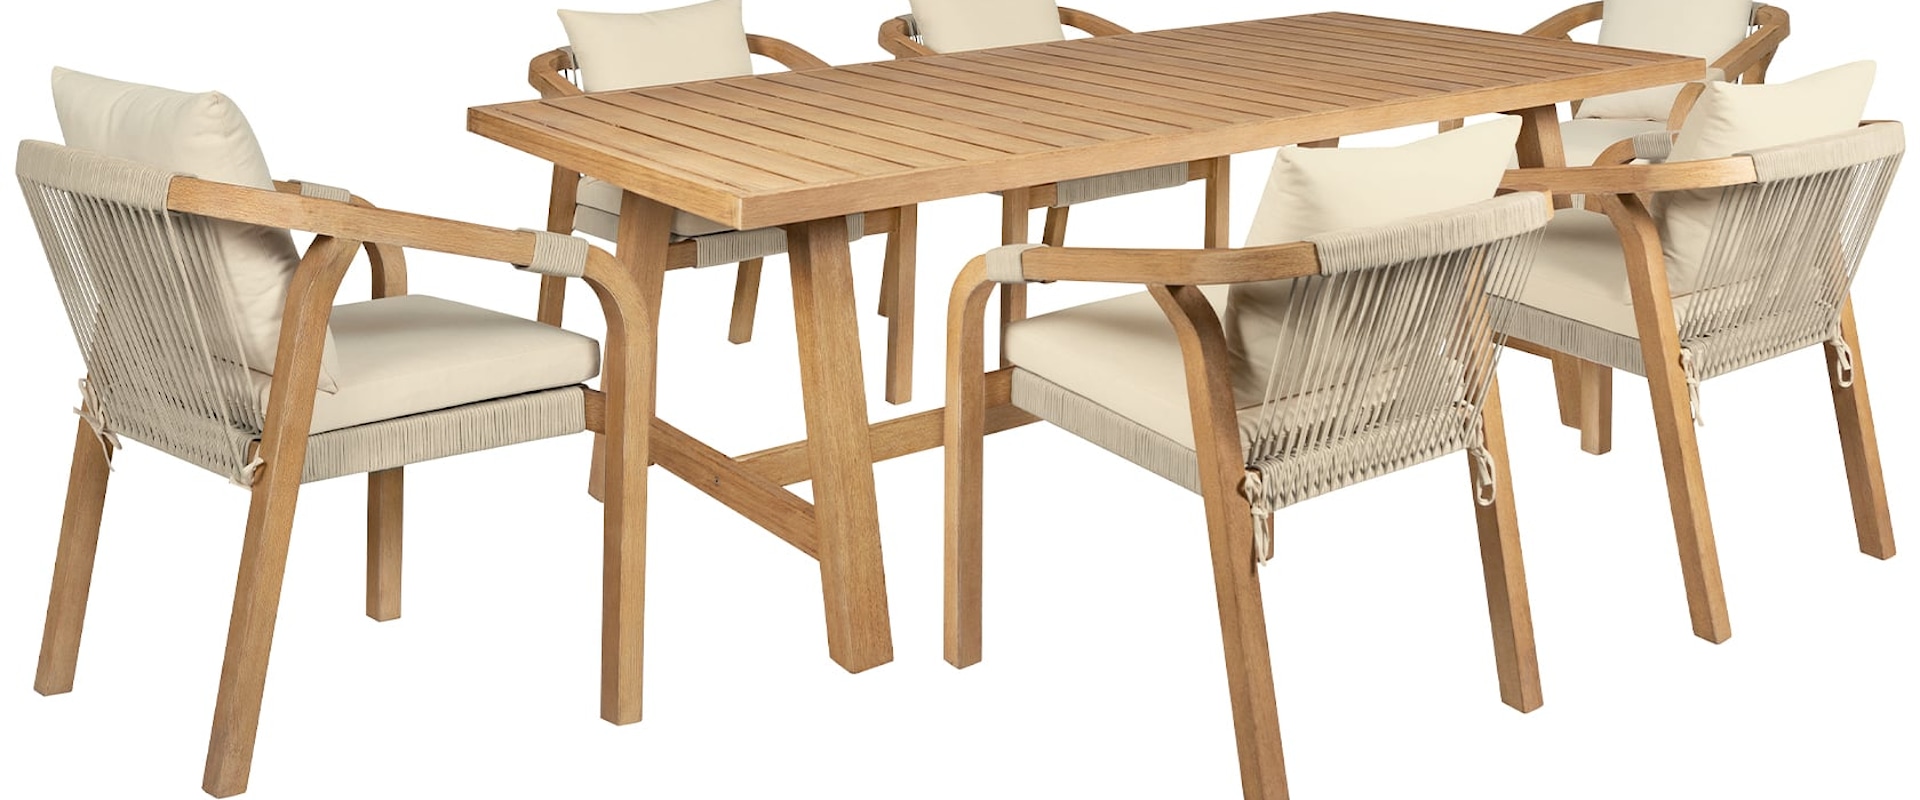 Coastal 7-Piece Patio Dining Set with Water and UV Resistant Table Wood